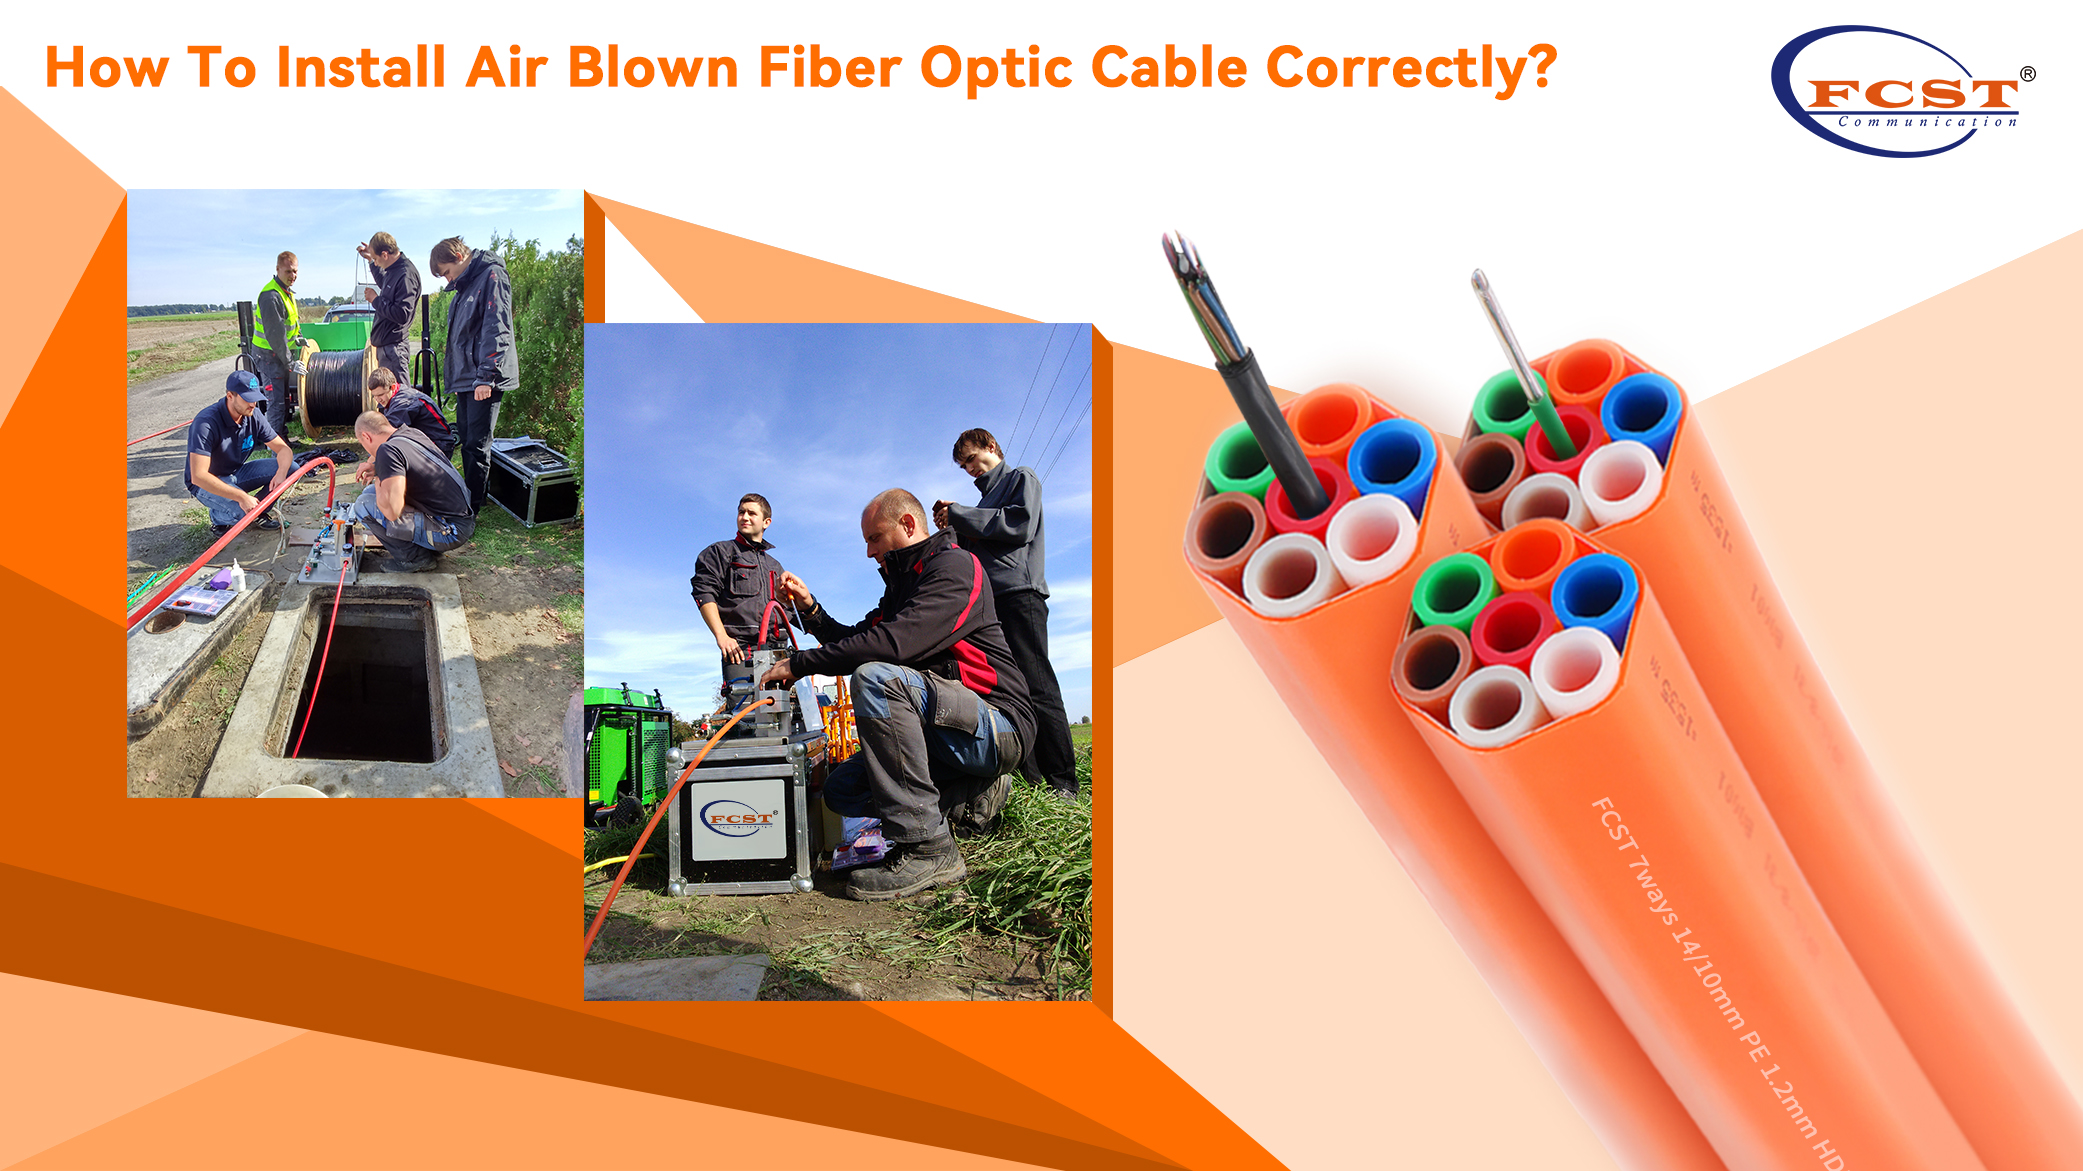 How To Install Air Blown Fiber Optic Cable Correctly